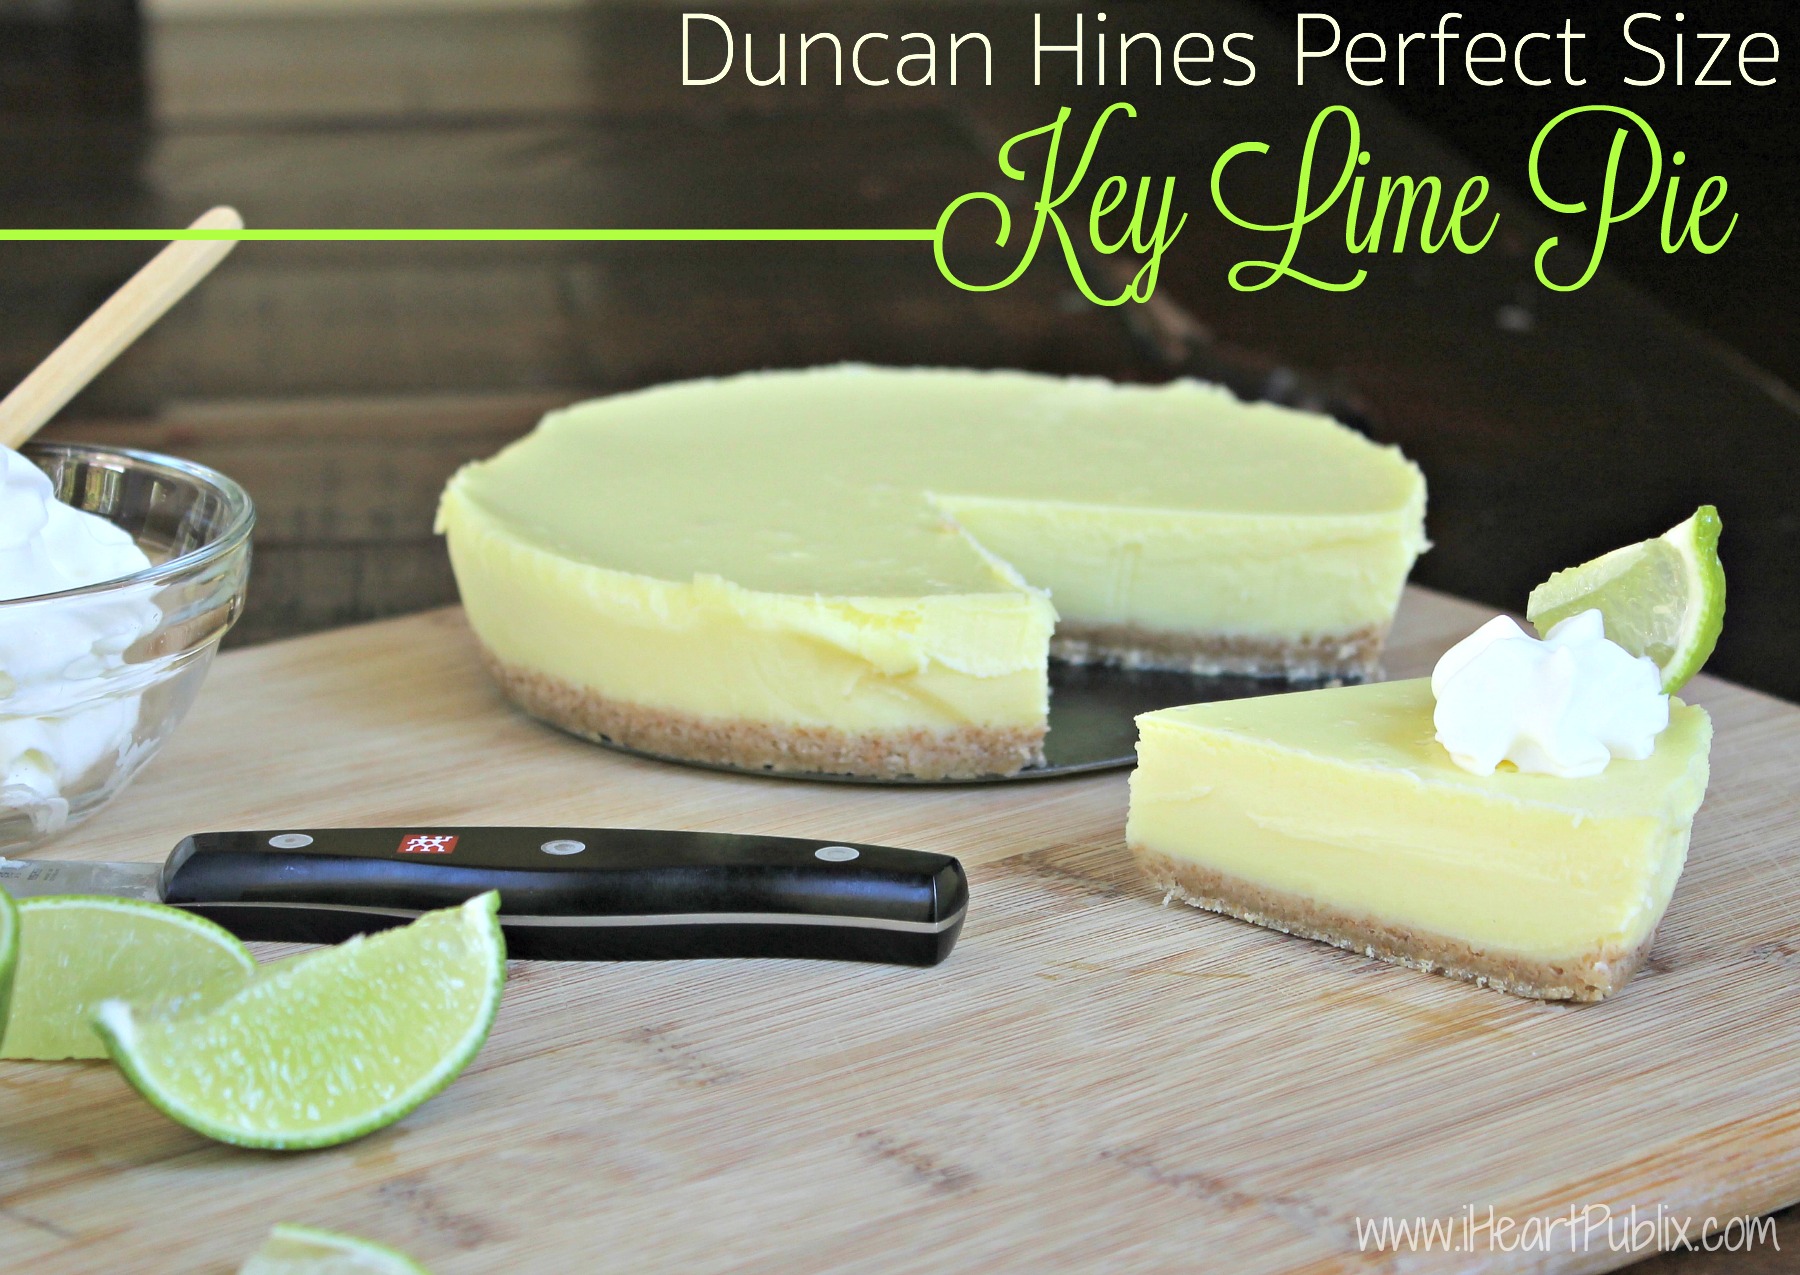 duncan-hines-perfect-size-key-lime-pie